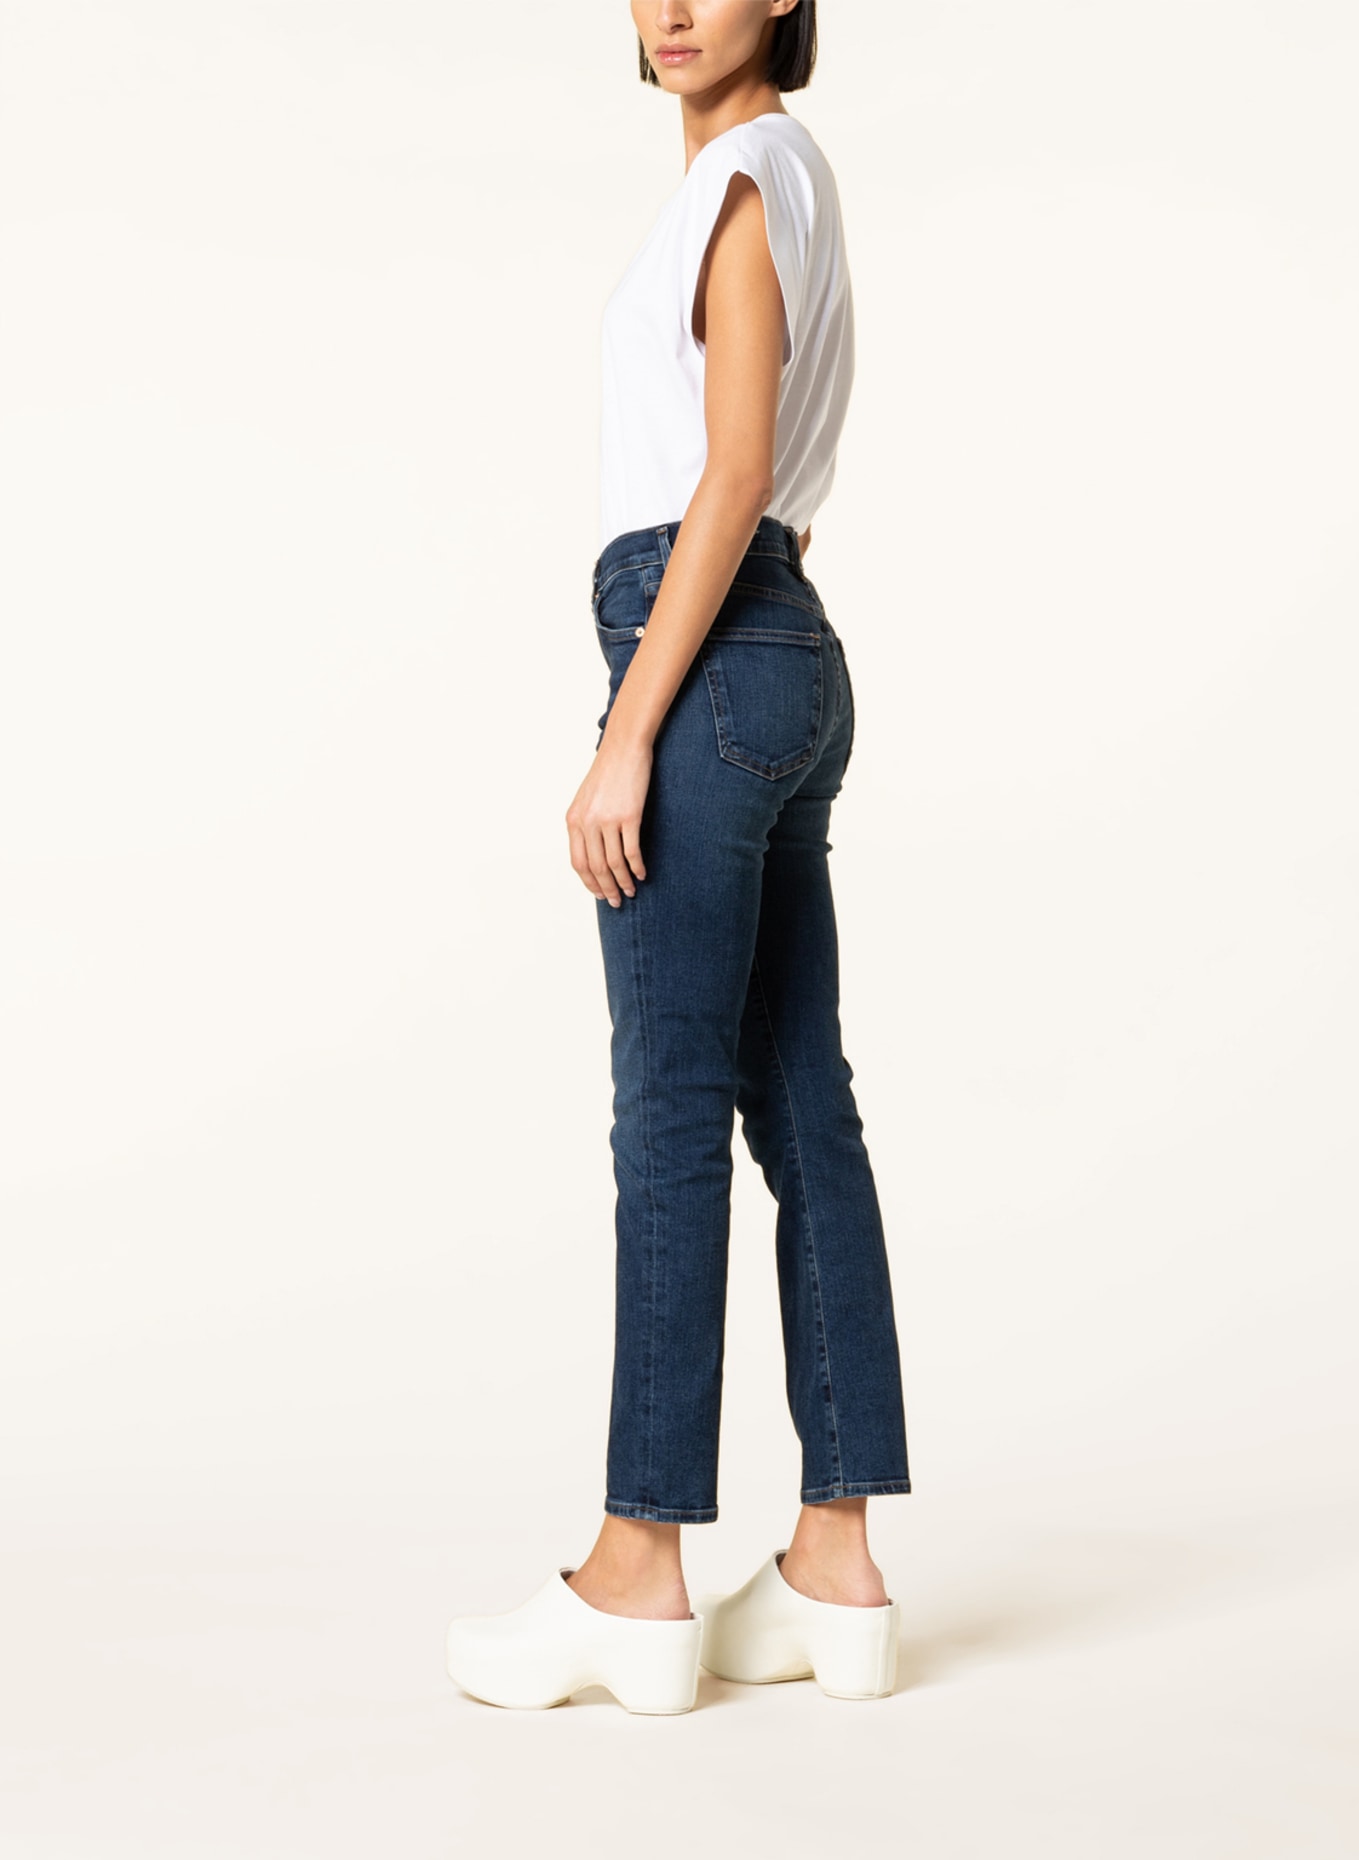 CITIZENS of HUMANITY Skinny jeans SKYLA , Color: Evermore dk indigo (Image 4)